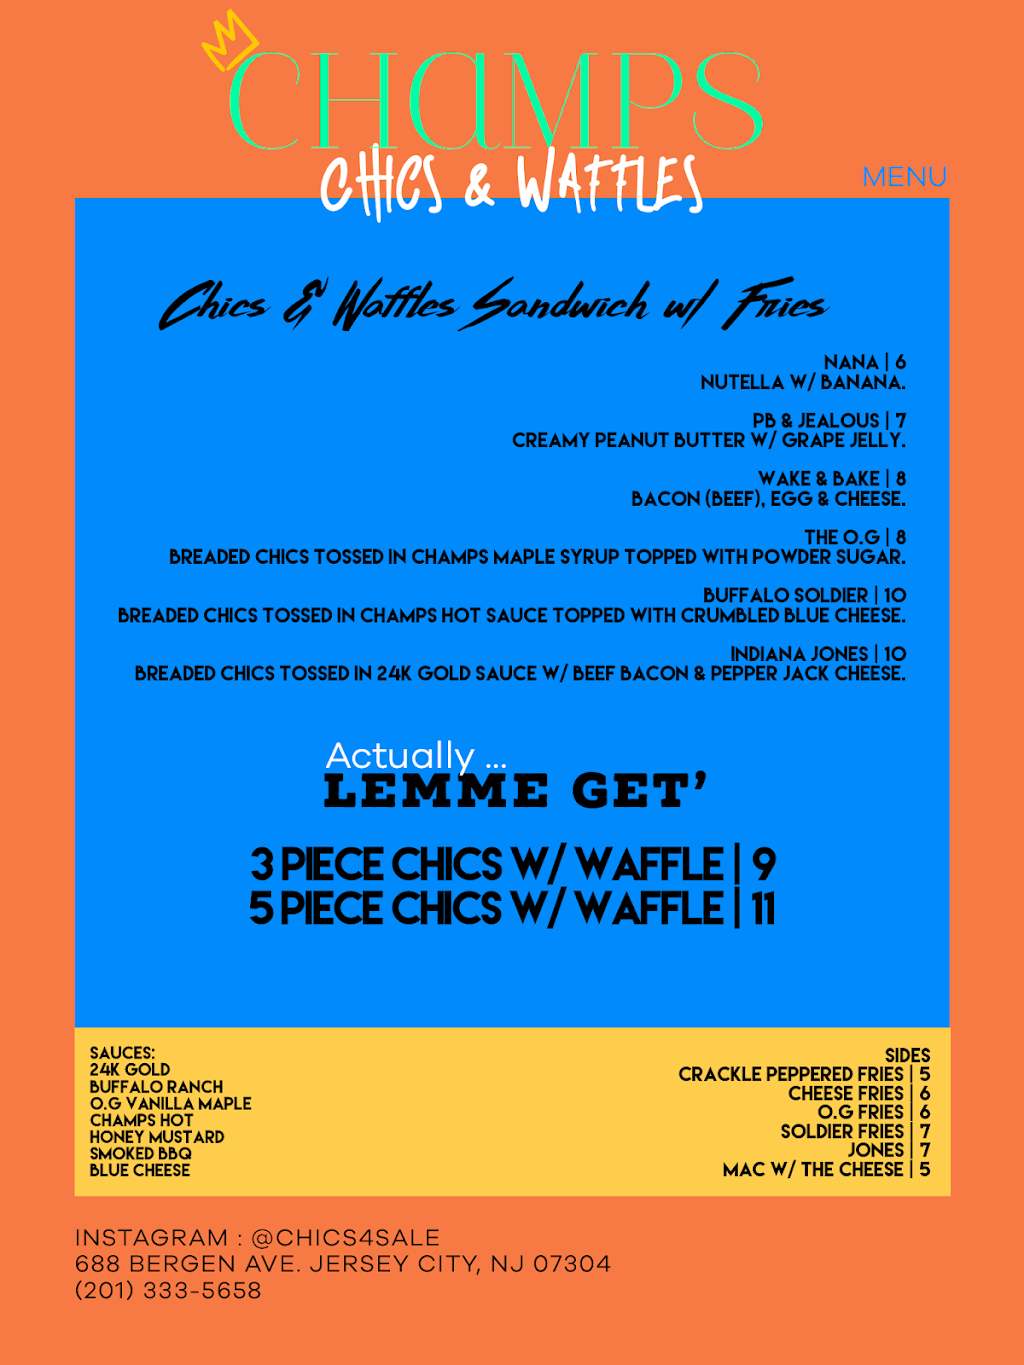 Champs Chics & Waffles | restaurant | 688 Bergen Ave, Jersey City, NJ 07304, USA | 2013335658 OR +1 201-333-5658